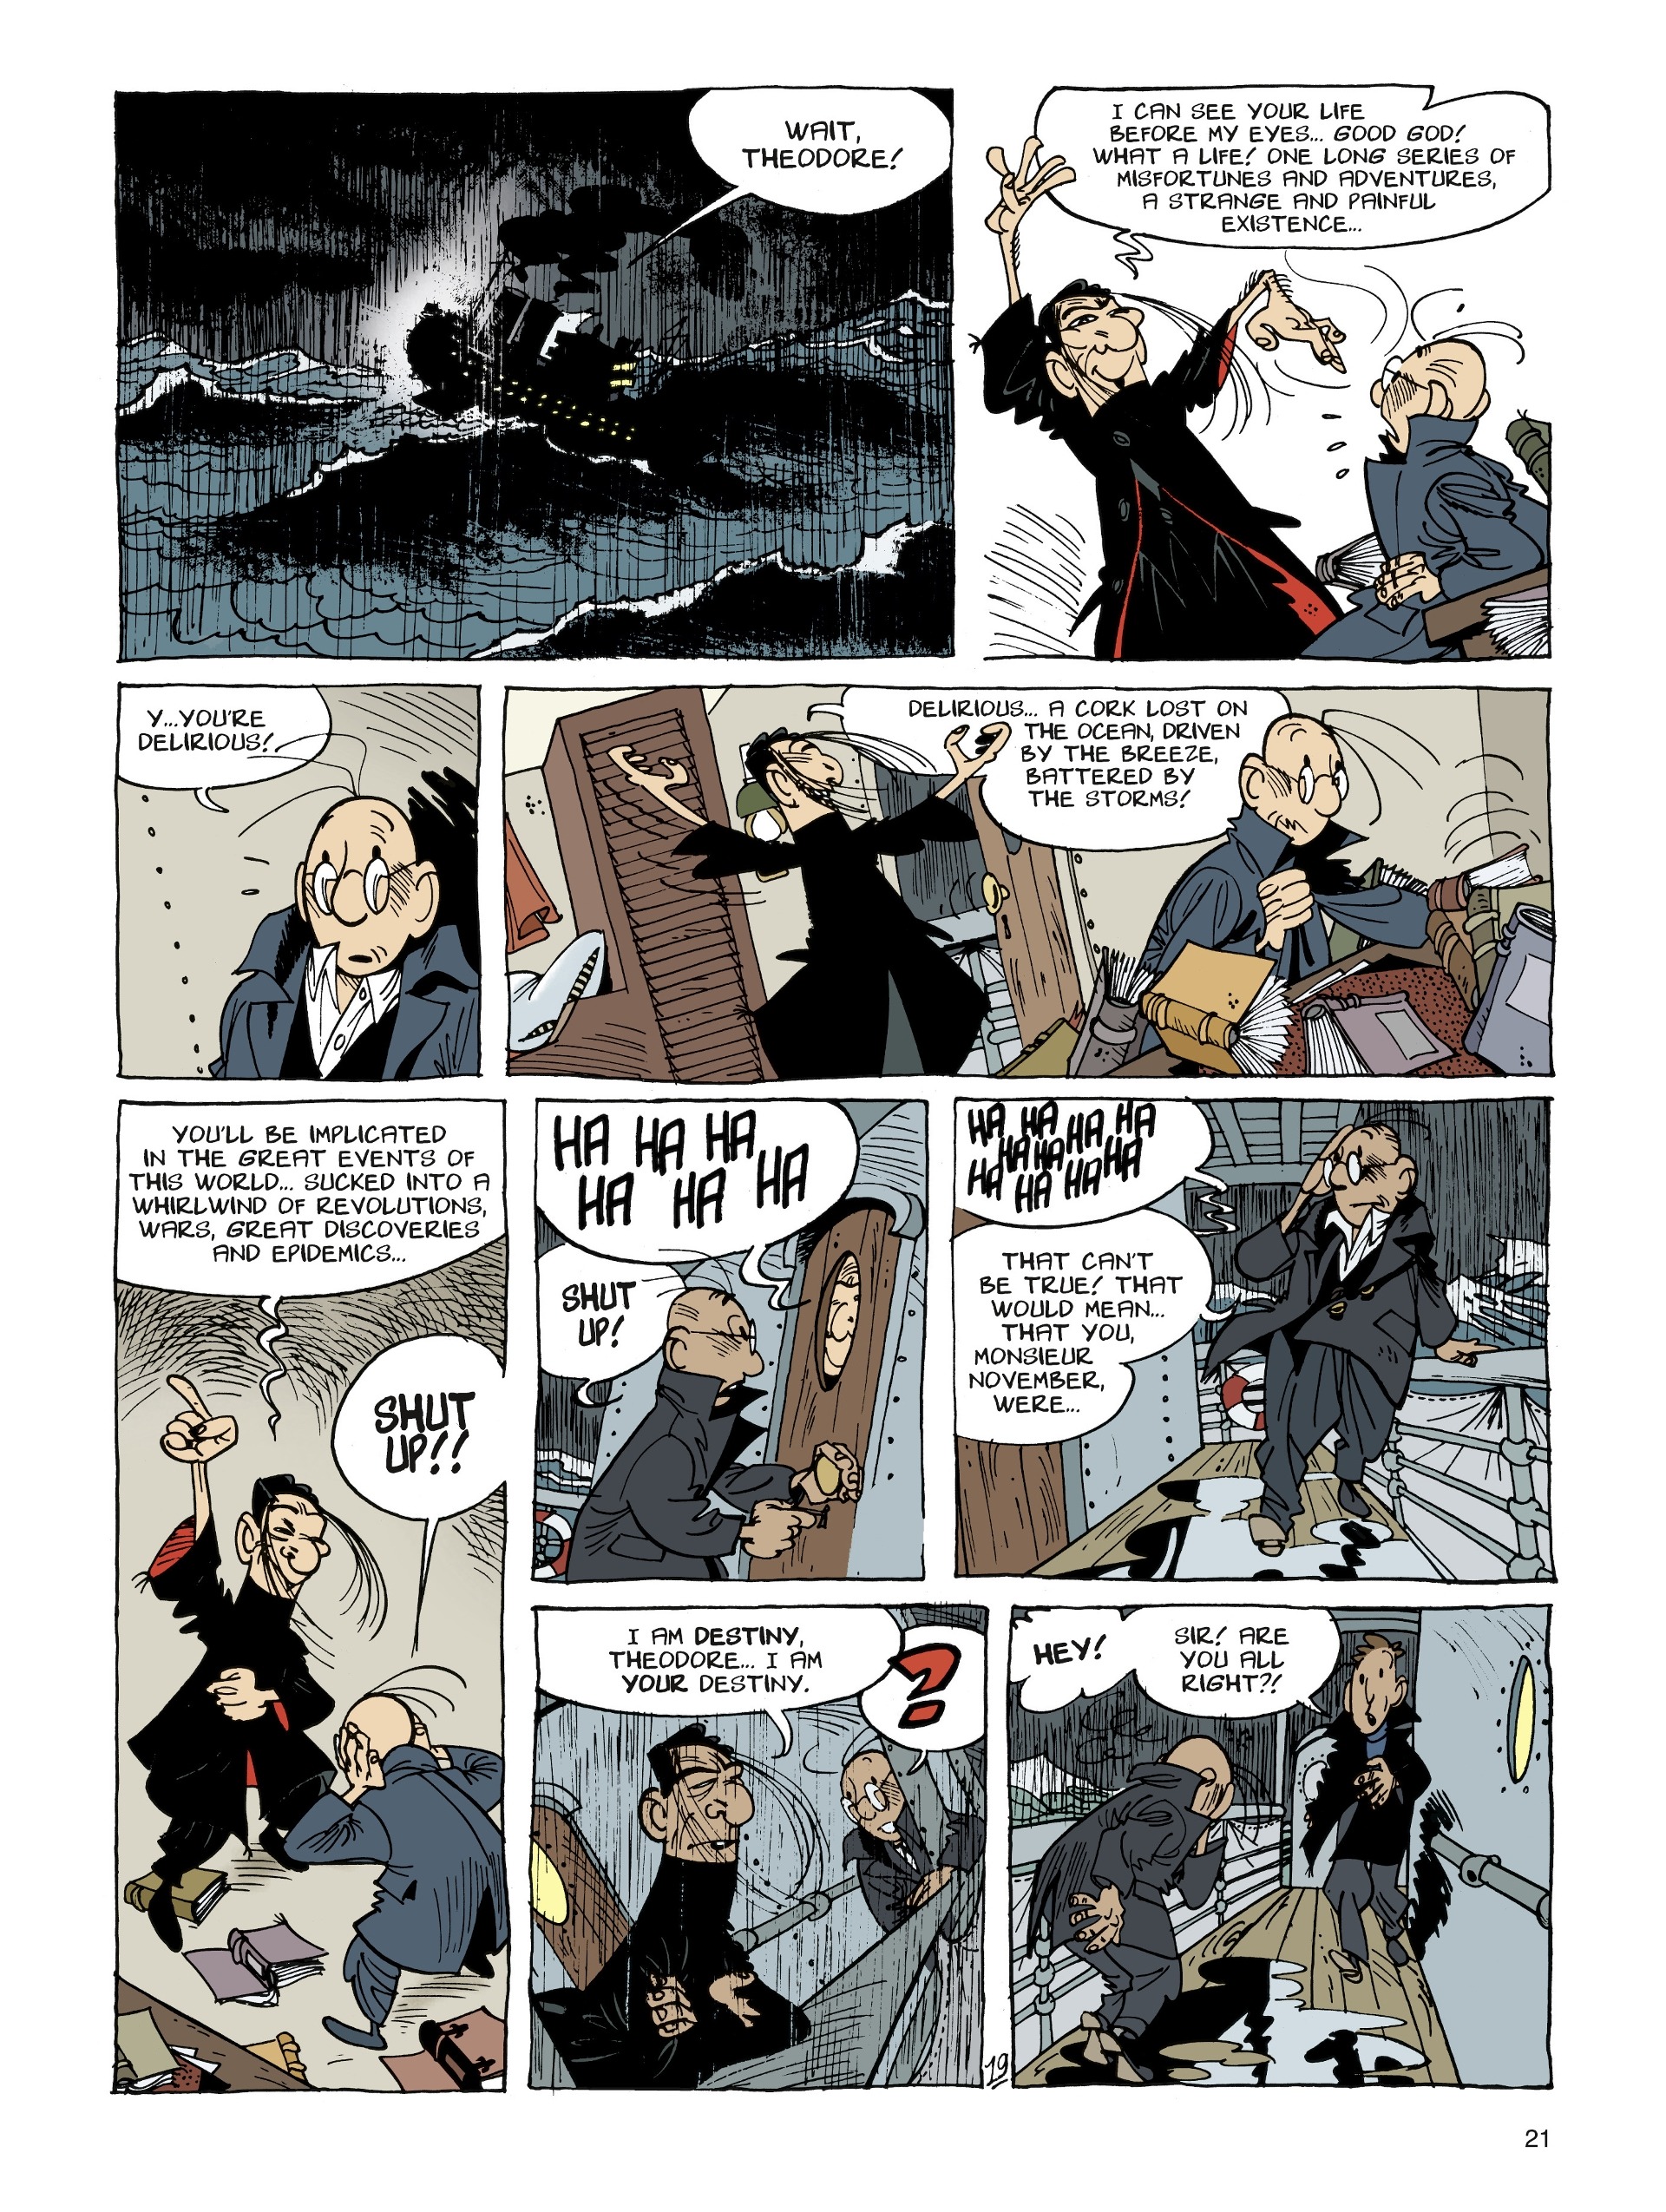 Read online Theodore Poussin comic -  Issue #1 - 21